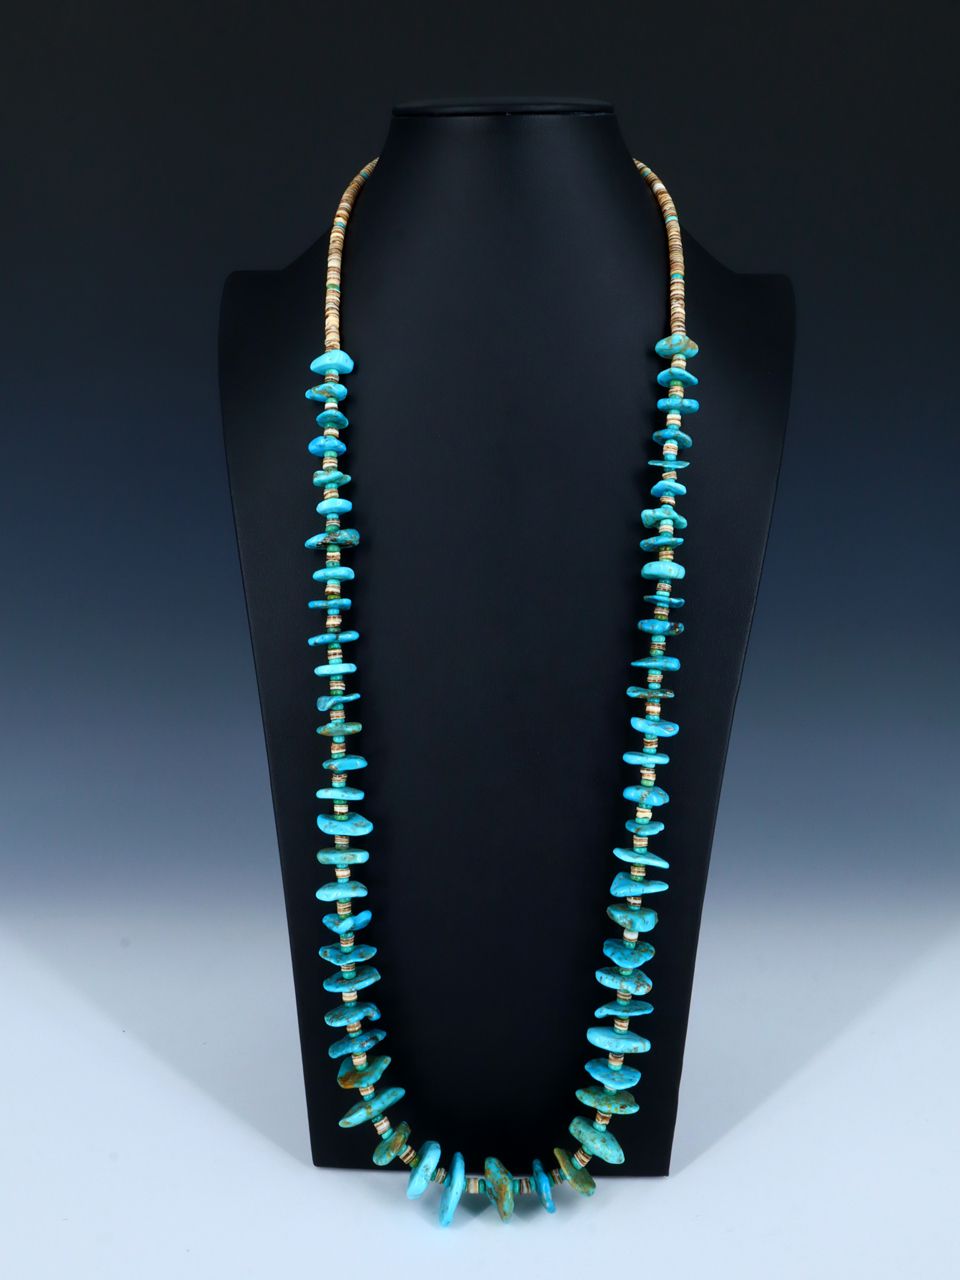 Bohemian Turquoise Turquoise Pendant Necklace With Rhinestone Fringe For  Women Chunky Statement Chain Jewelry From Yy_dhhome, $3.88 | DHgate.Com